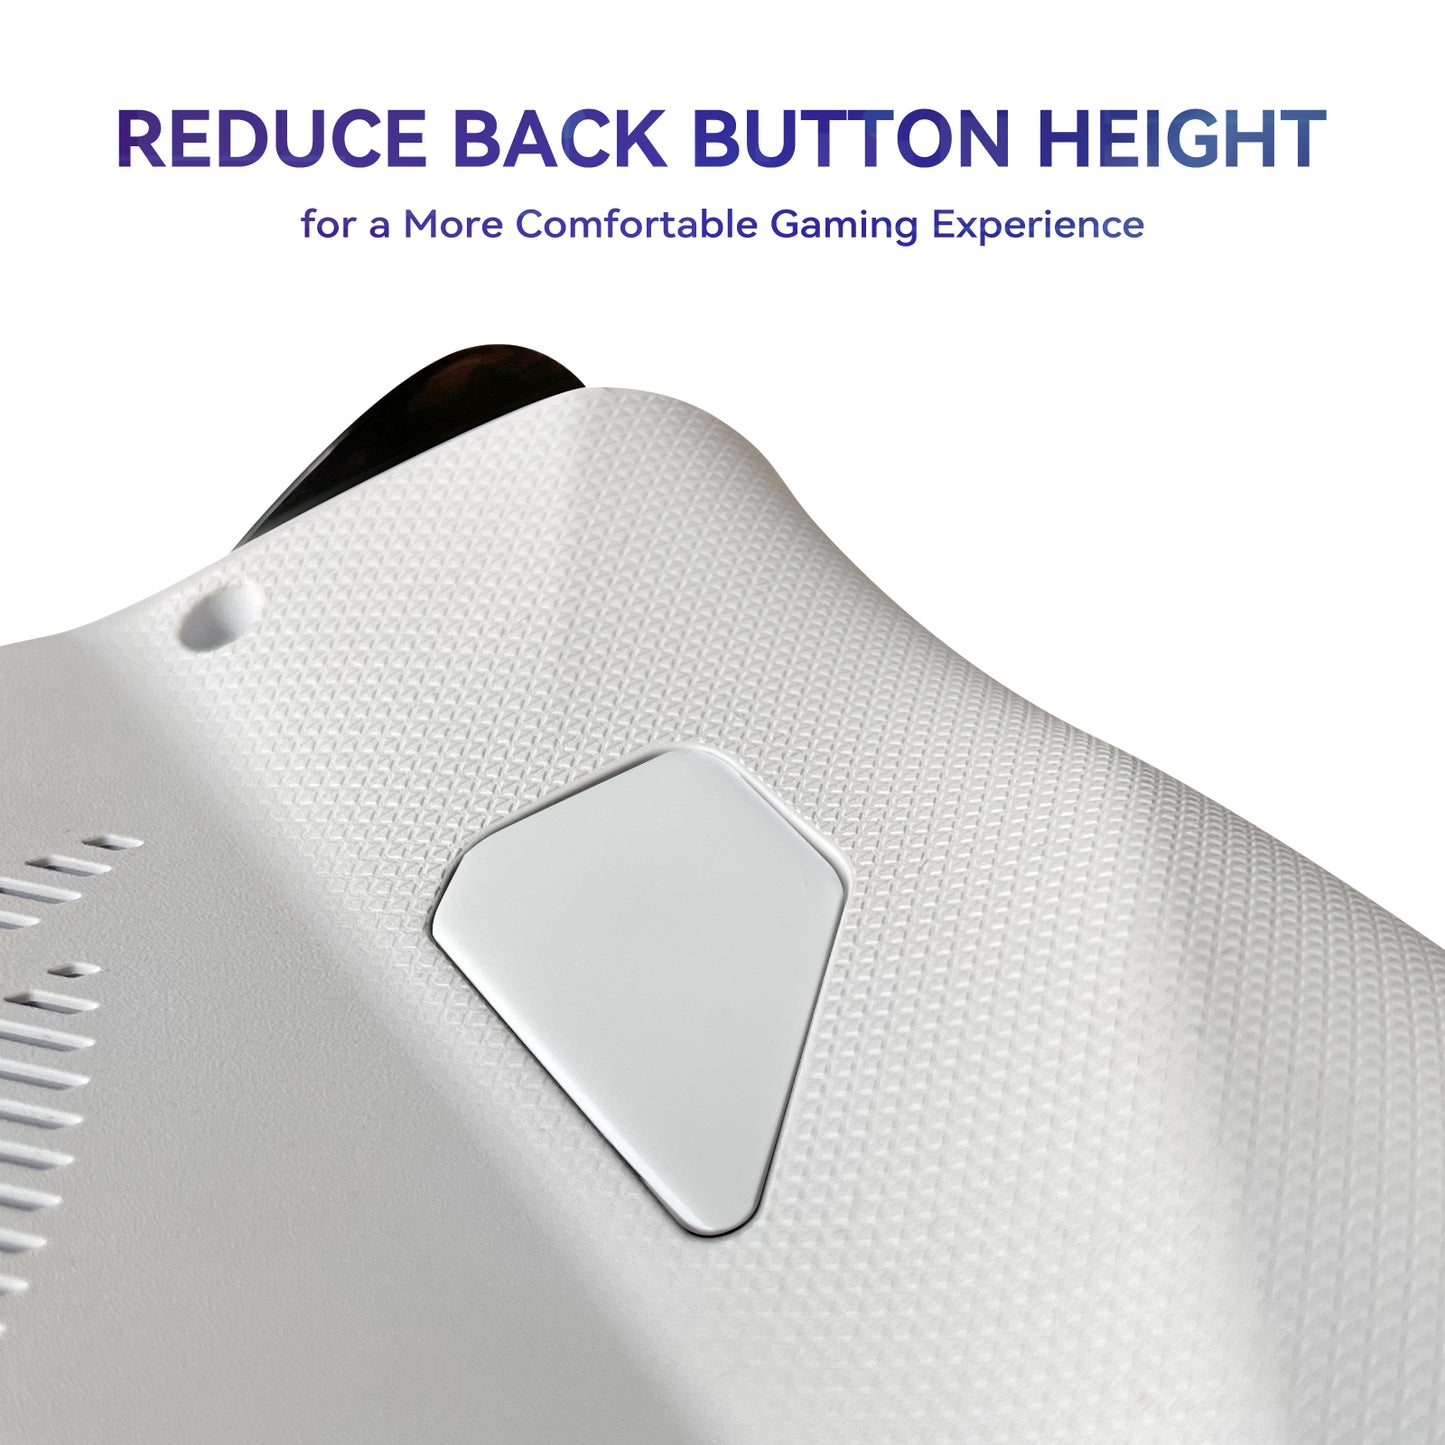 [New Year Limited] 1 Pair of Flat Back Buttons for ROG Ally, with Better Gaming Experience